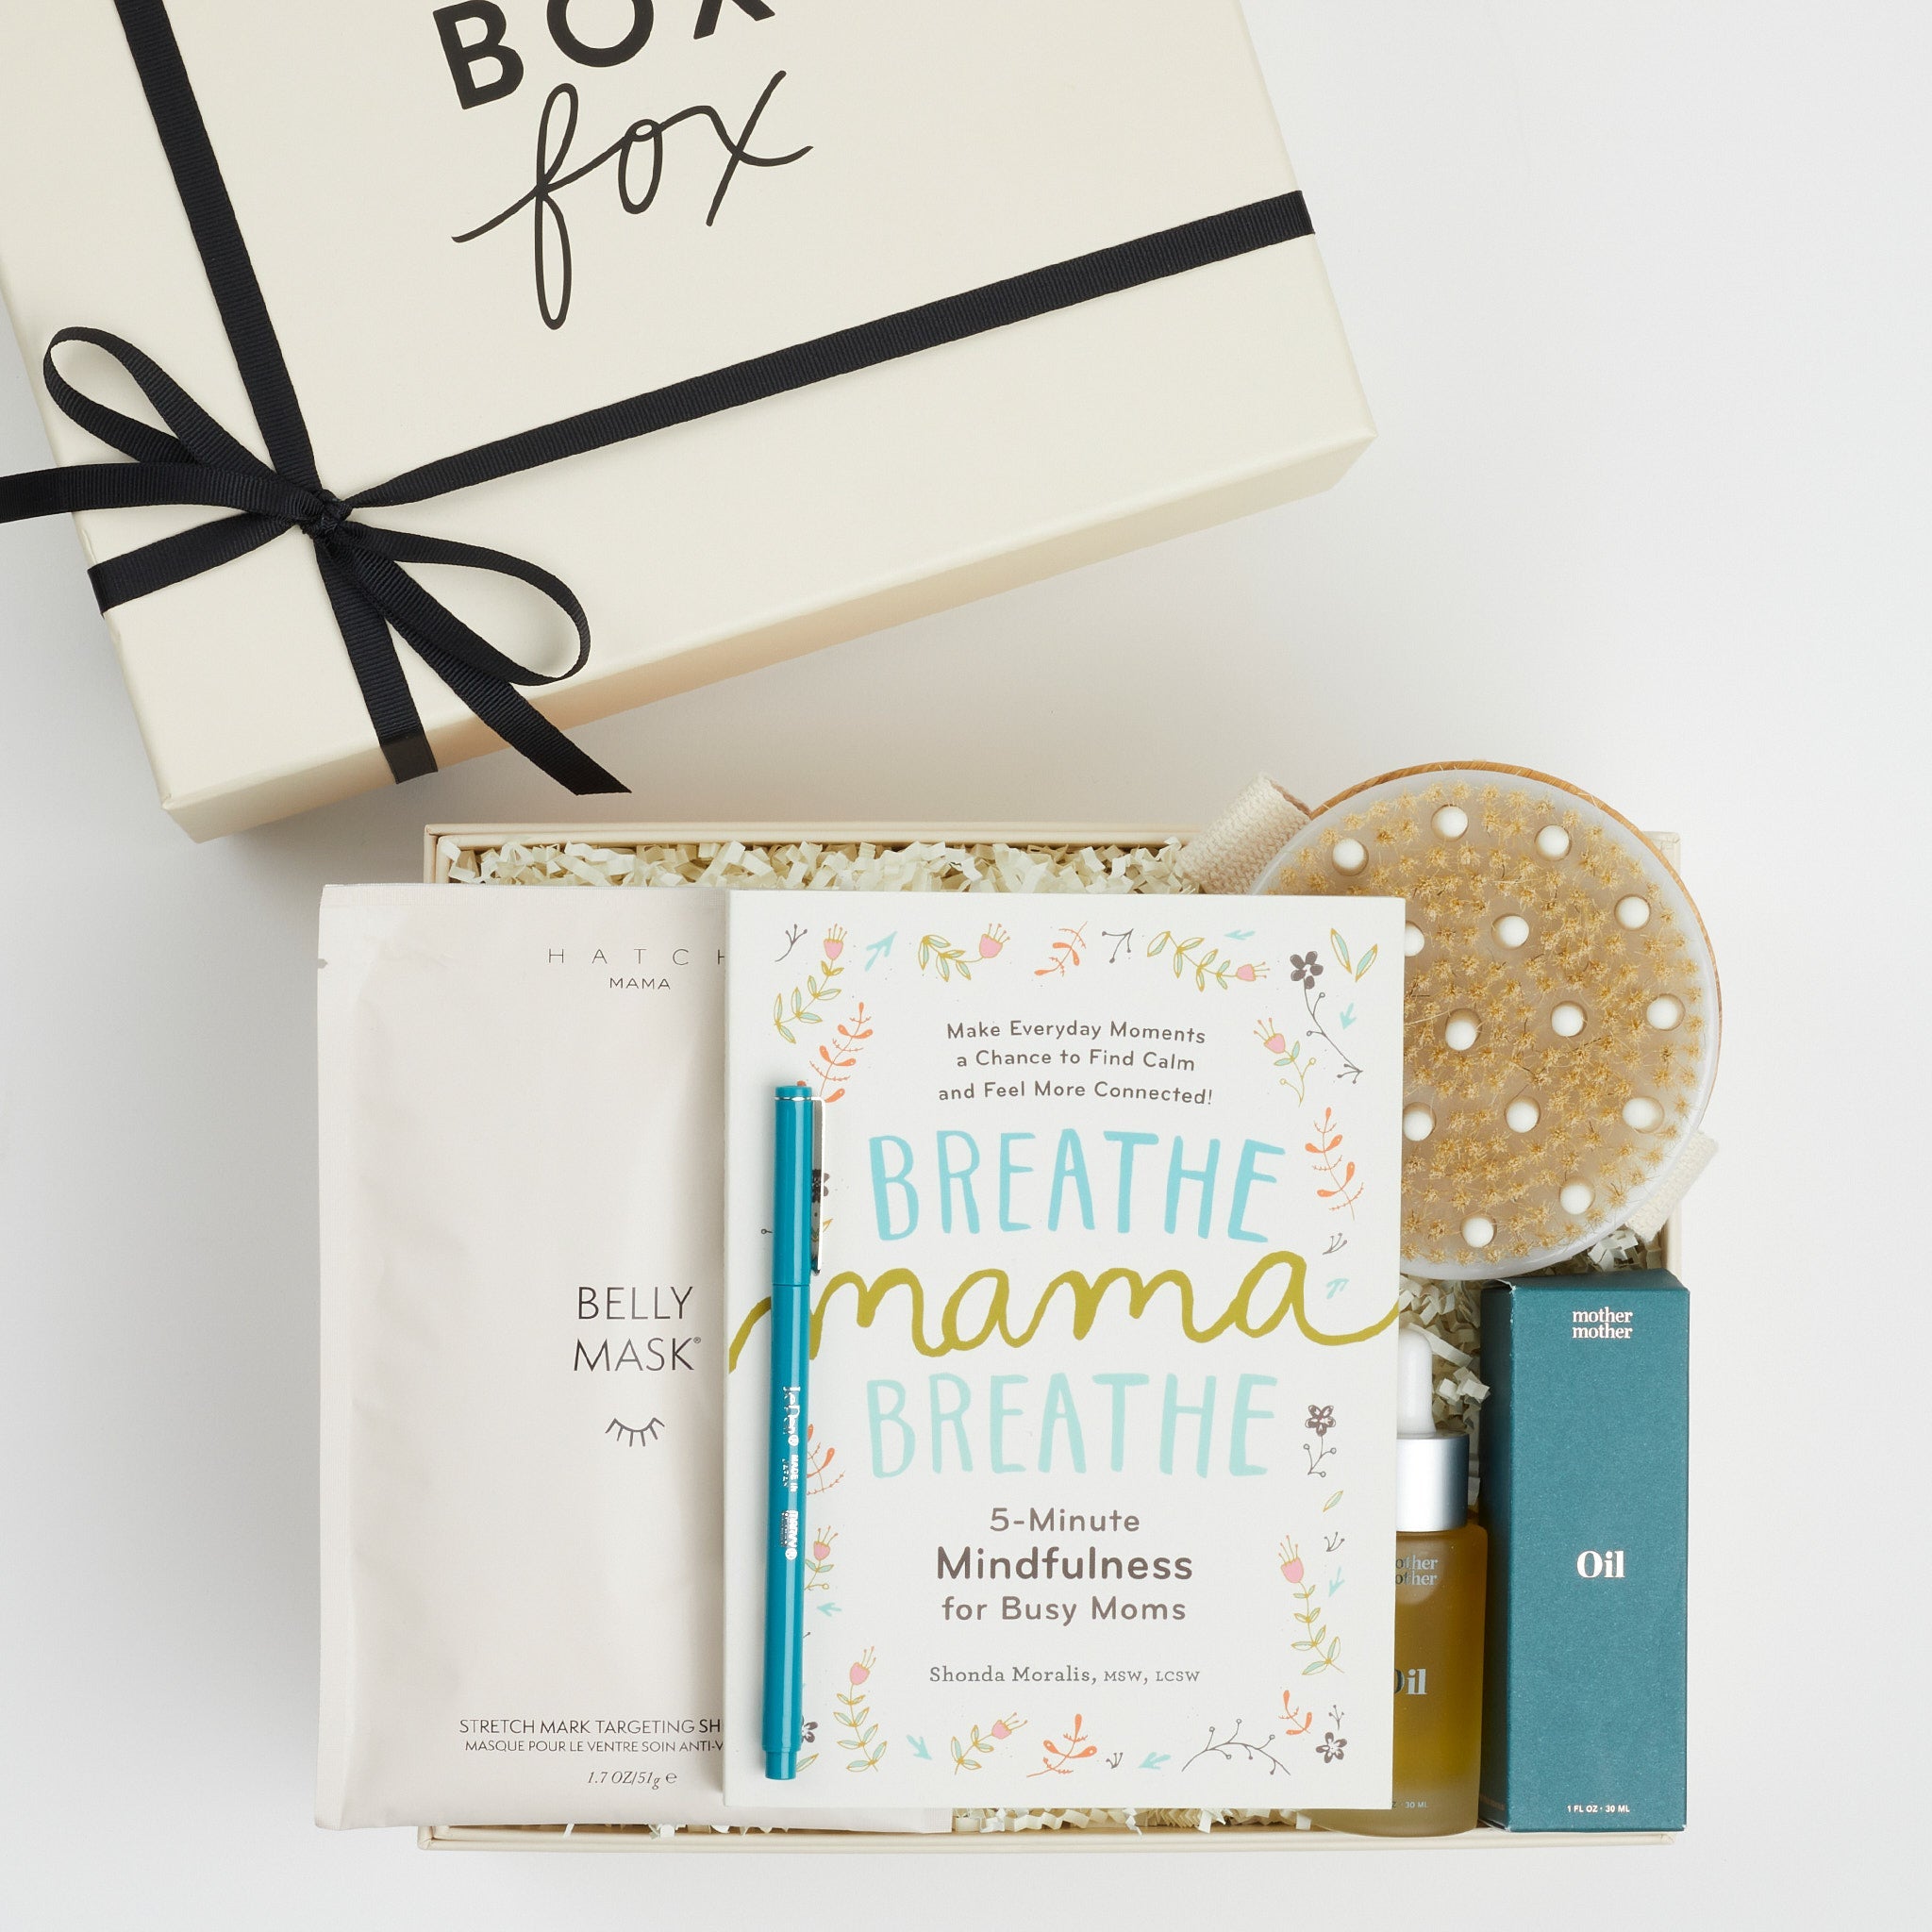 BOXFOX Creme Gift Box filled with &quot;Breathe Mama Breathe&quot; Book, Le Pen Teal Pen, Mother Mother Belly Oil, HATCH Belly Sheet Mask , and BOXFOX Round Dry Brush